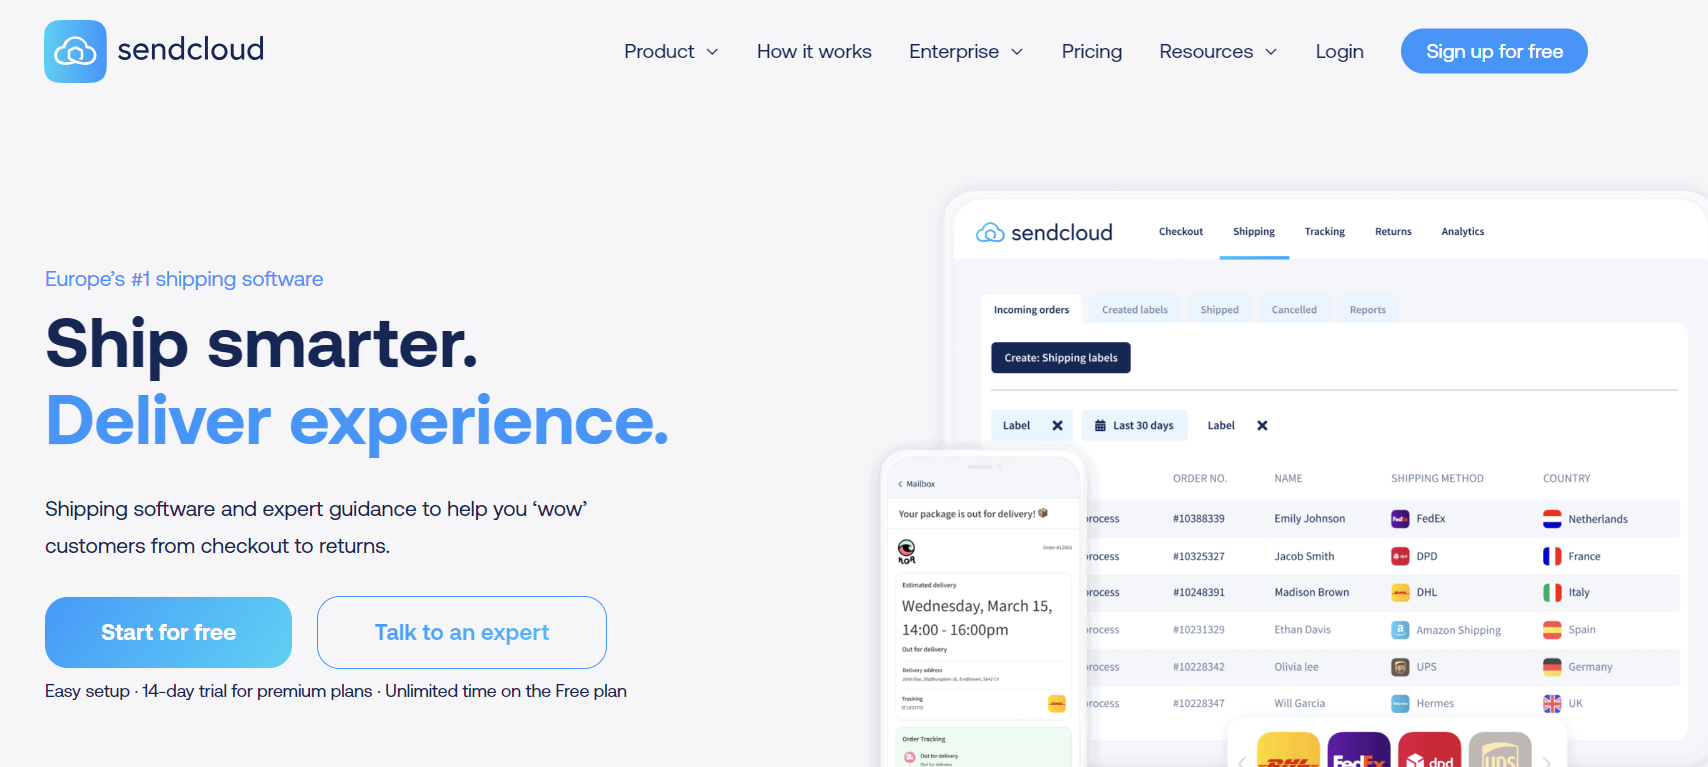 Dutch-based company SendCloud raised $177M in a Series C funding round. SendCloud is a Dutch cloud-based shipping service for online stores.